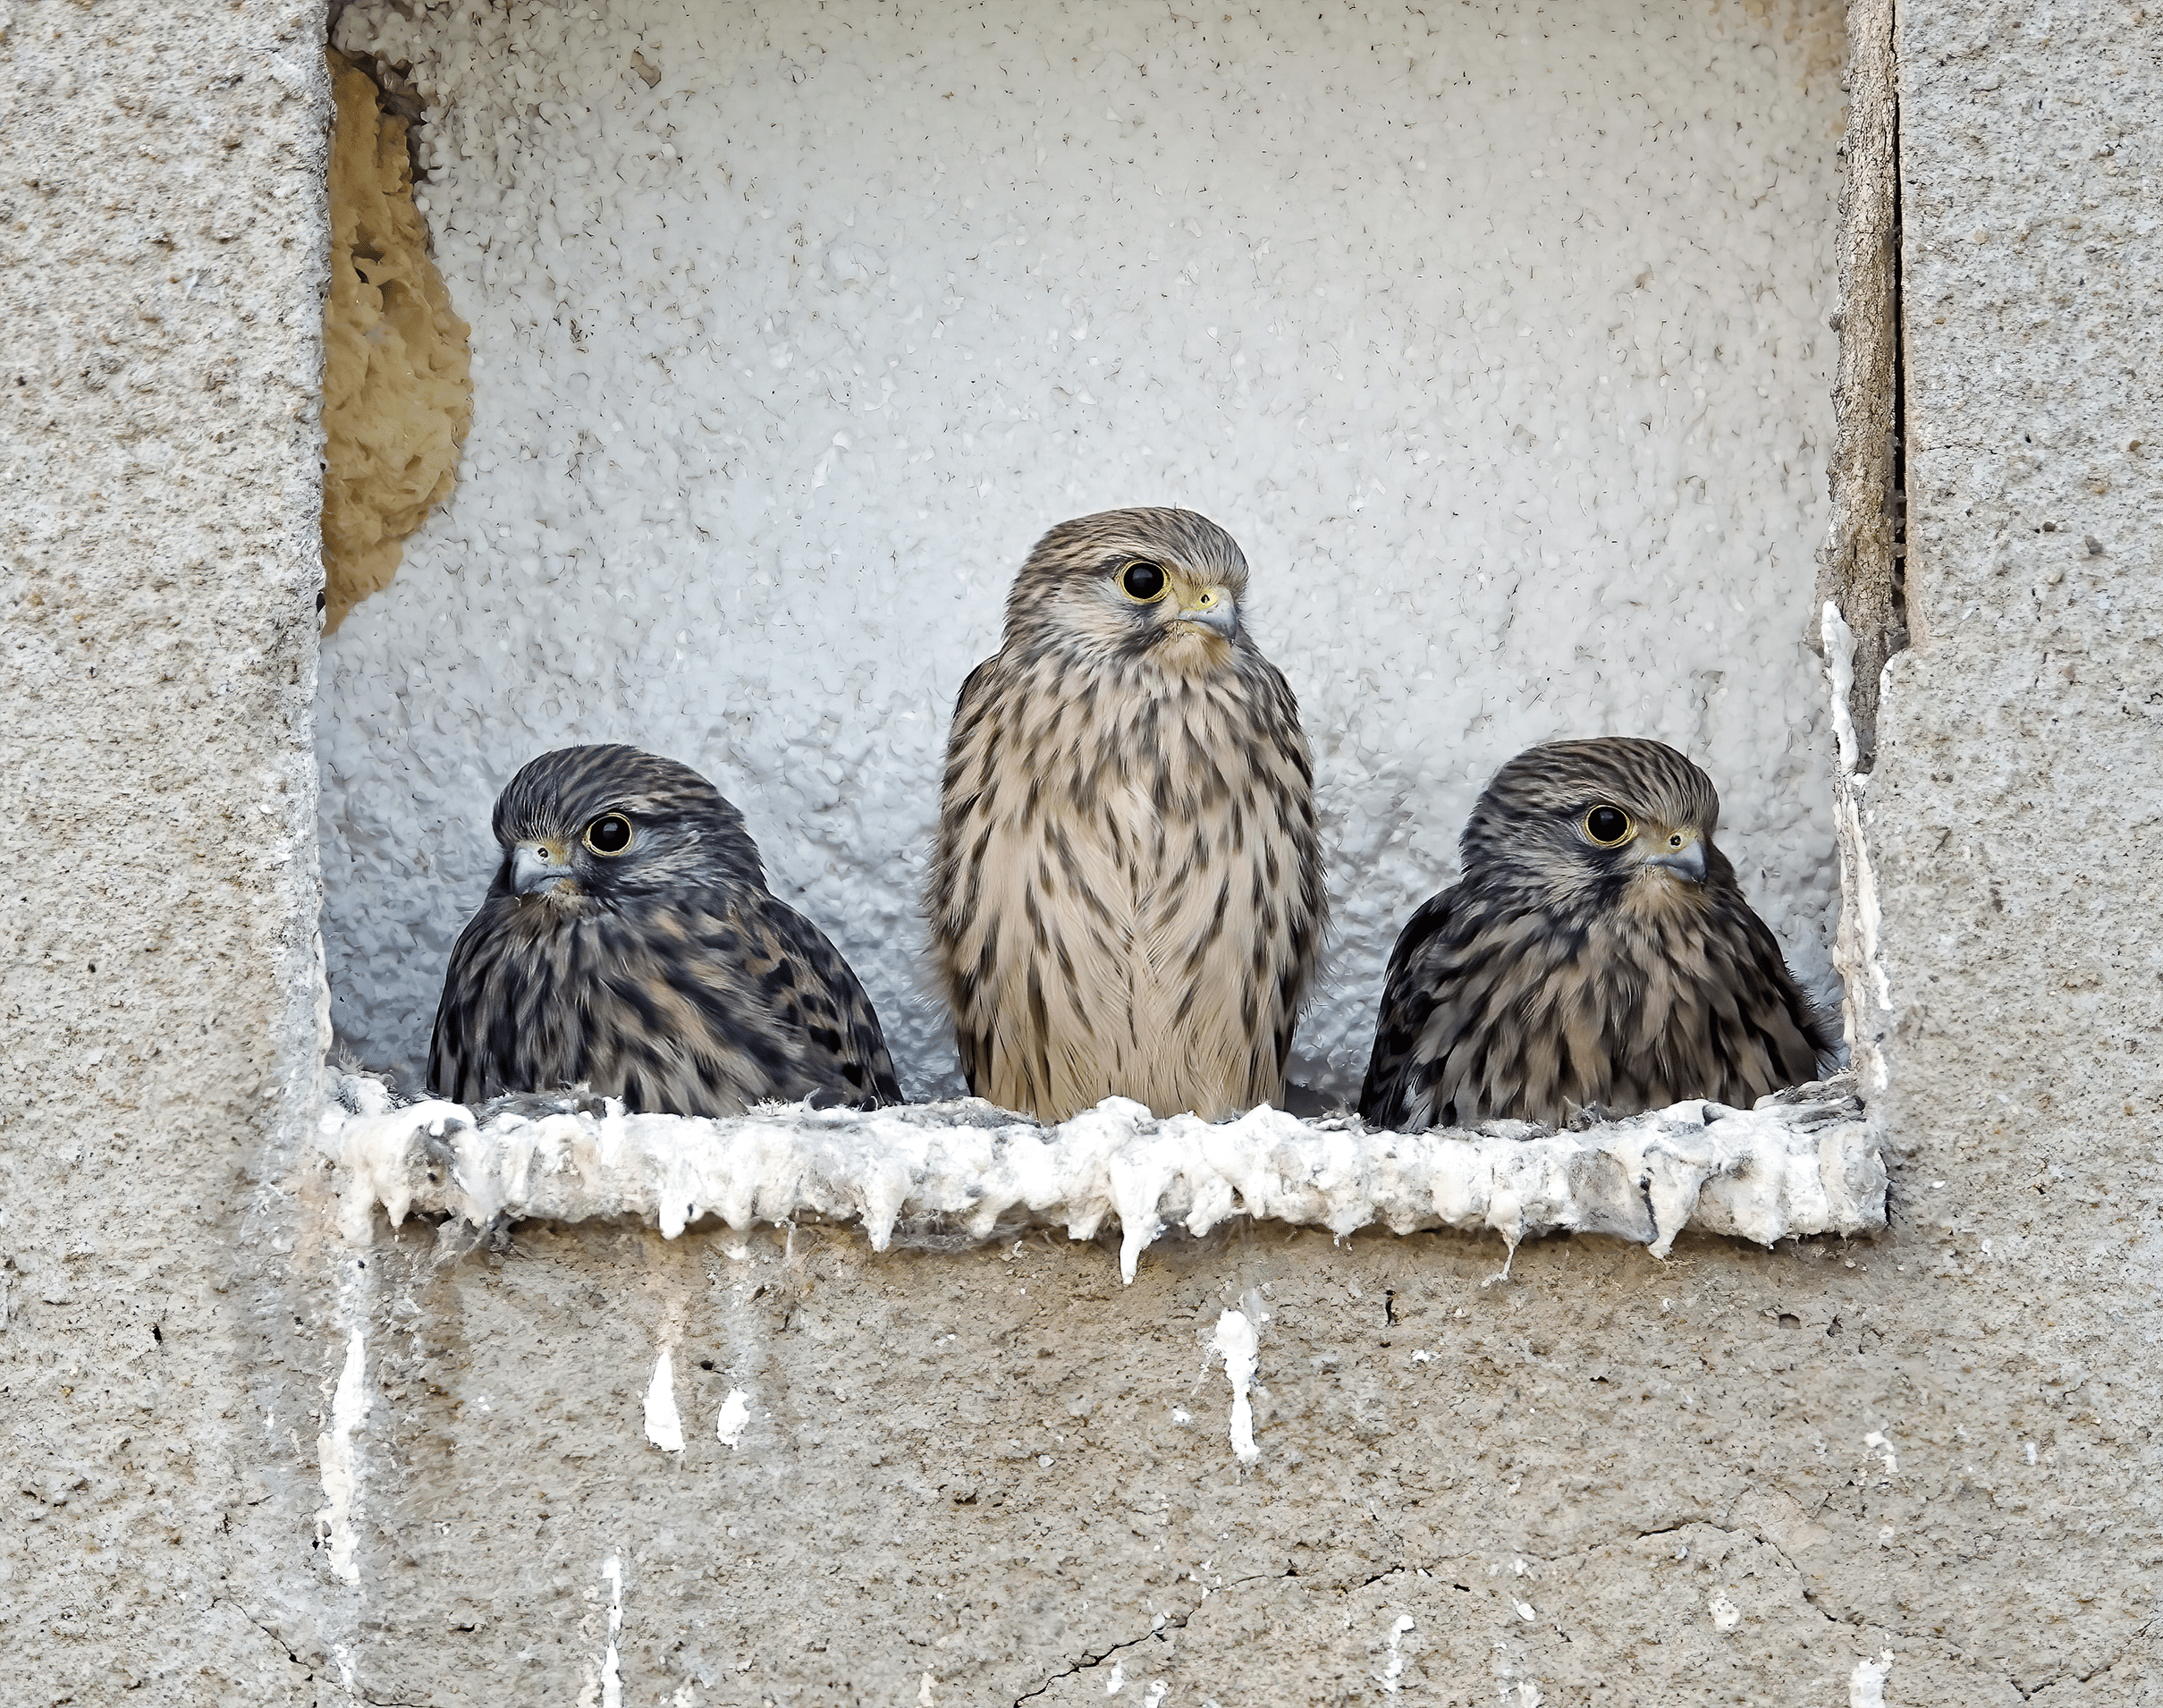 3 young stripey birds sit on a building ledge.